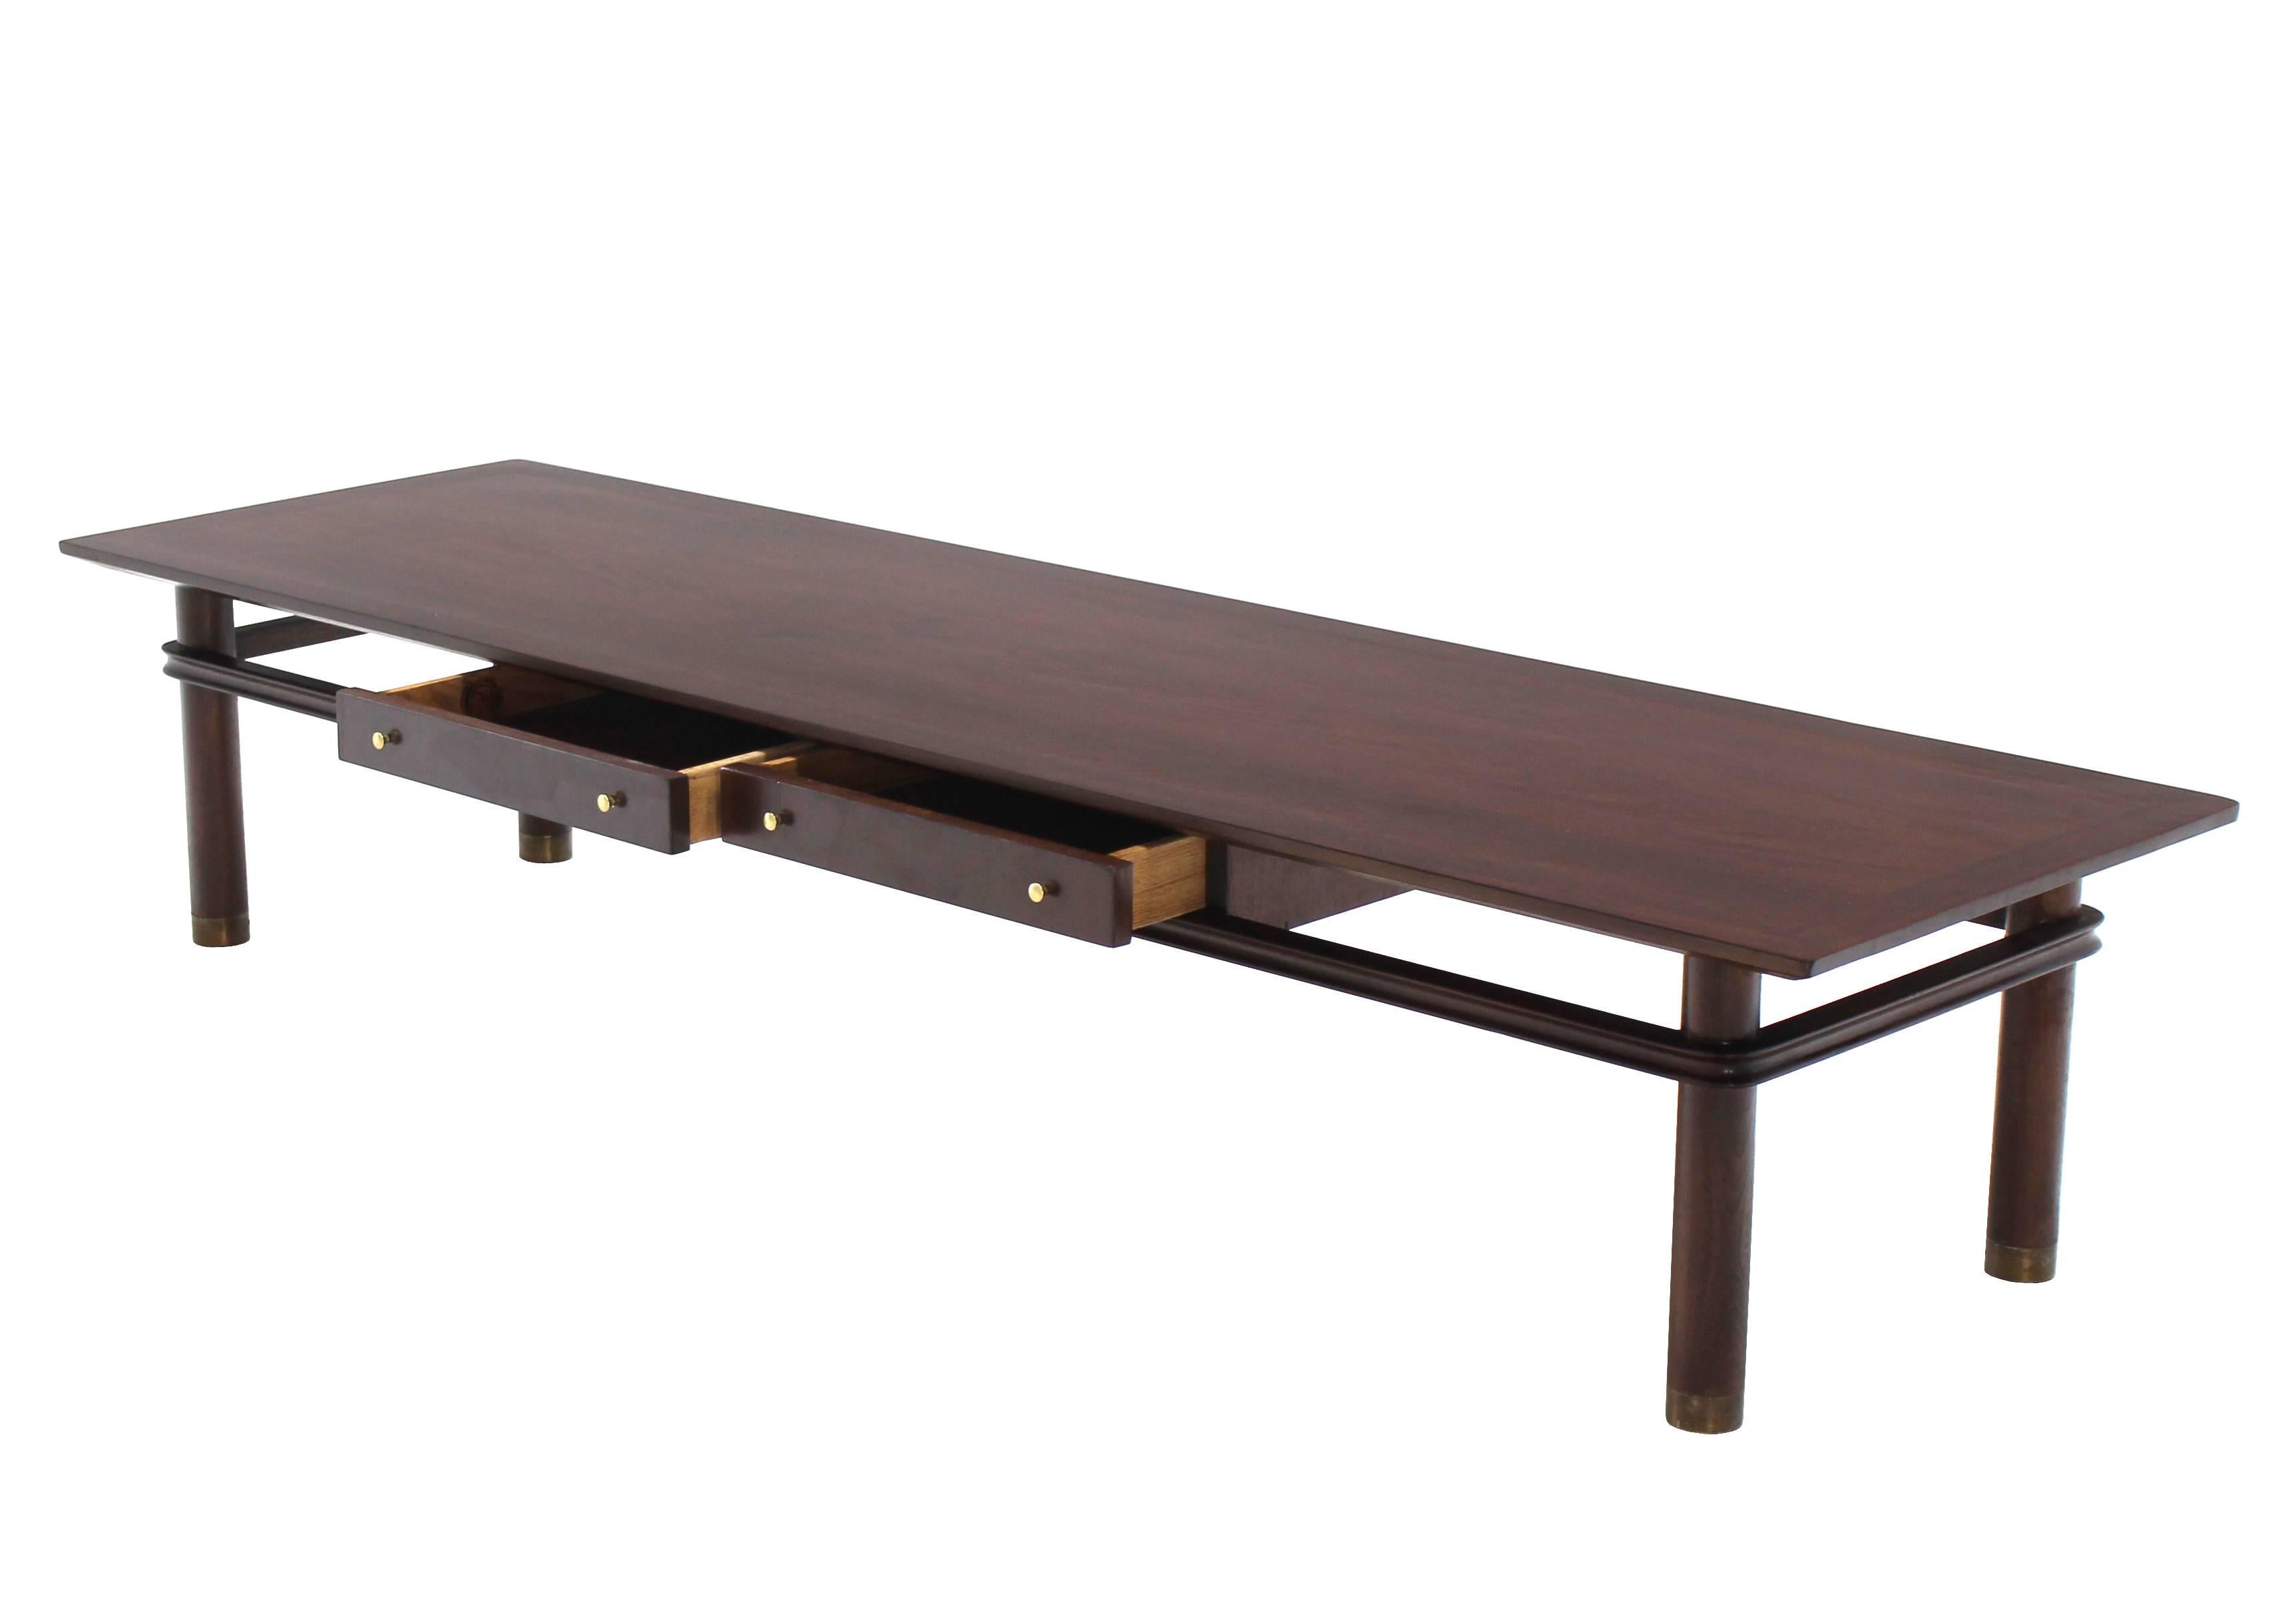 20th Century Long Mid Century Modern Walnut Coffee Table with Two Drawers For Sale